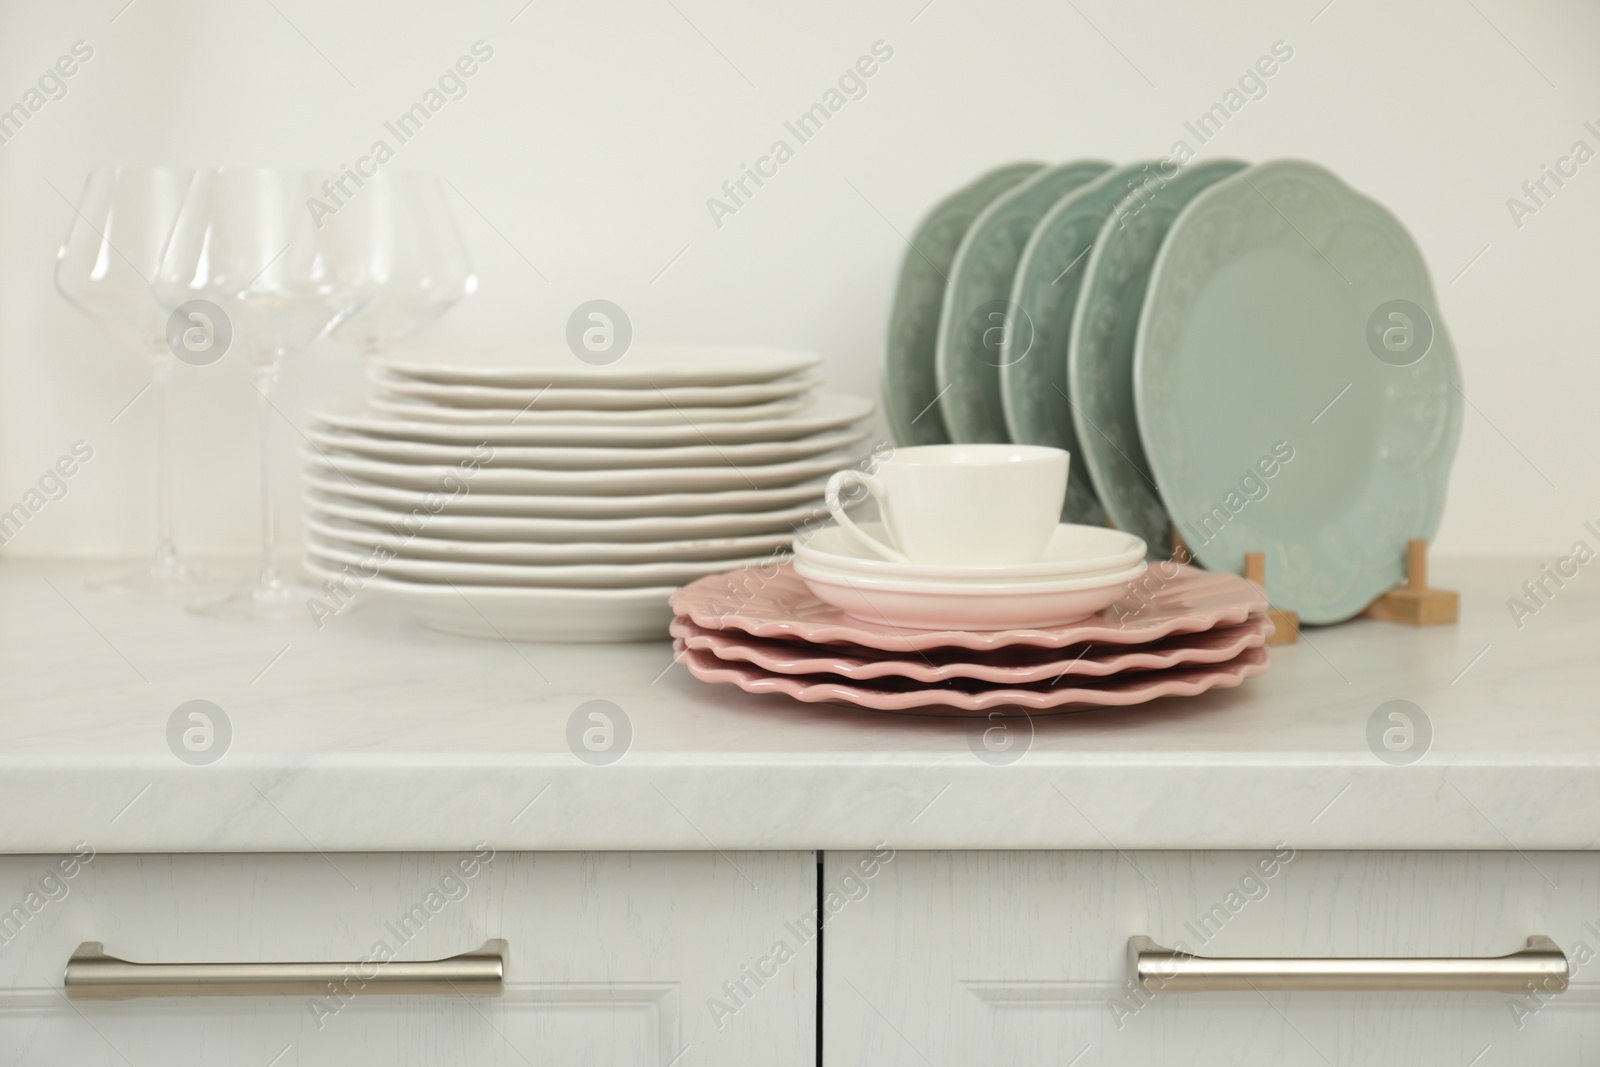 Photo of Clean plates, glasses and cup on white marble countertop in kitchen